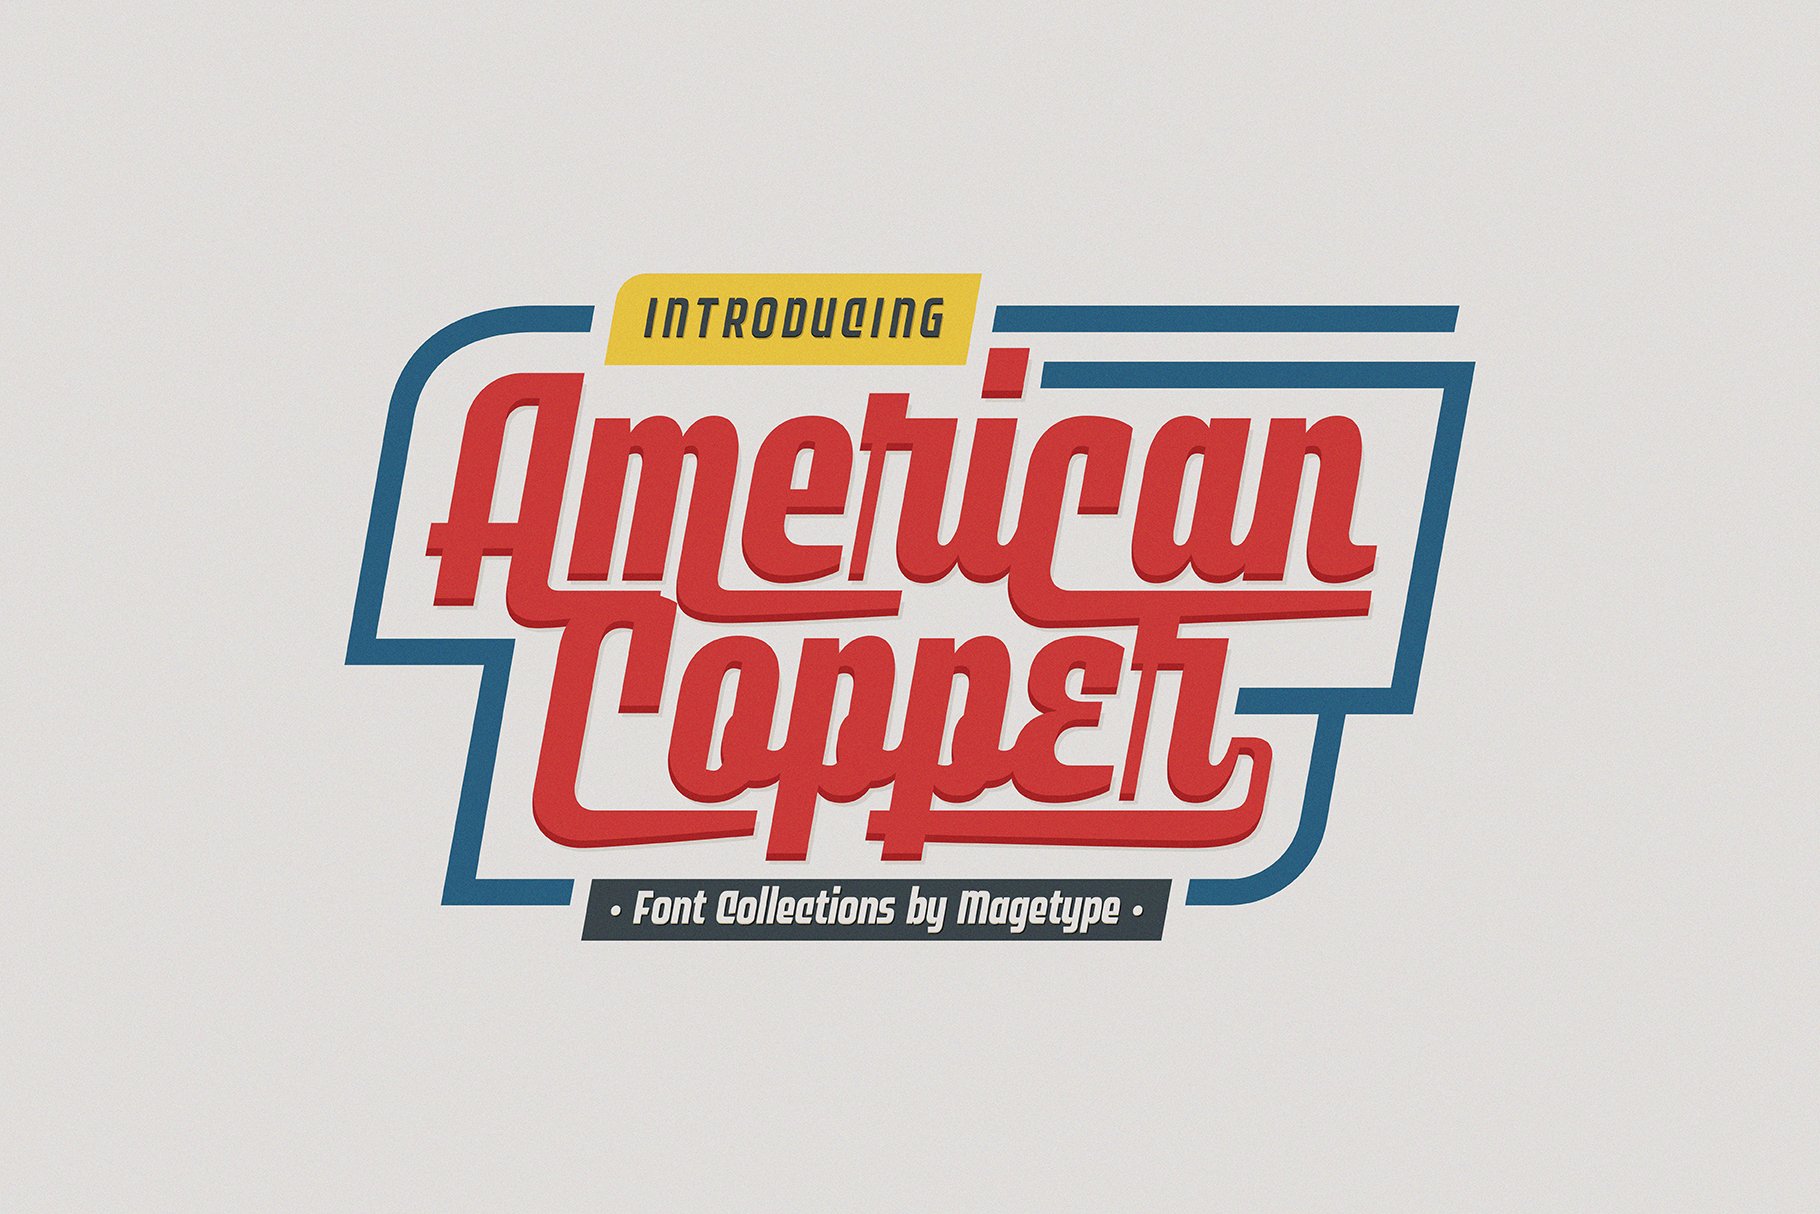 MGT American Copper Family cover image.